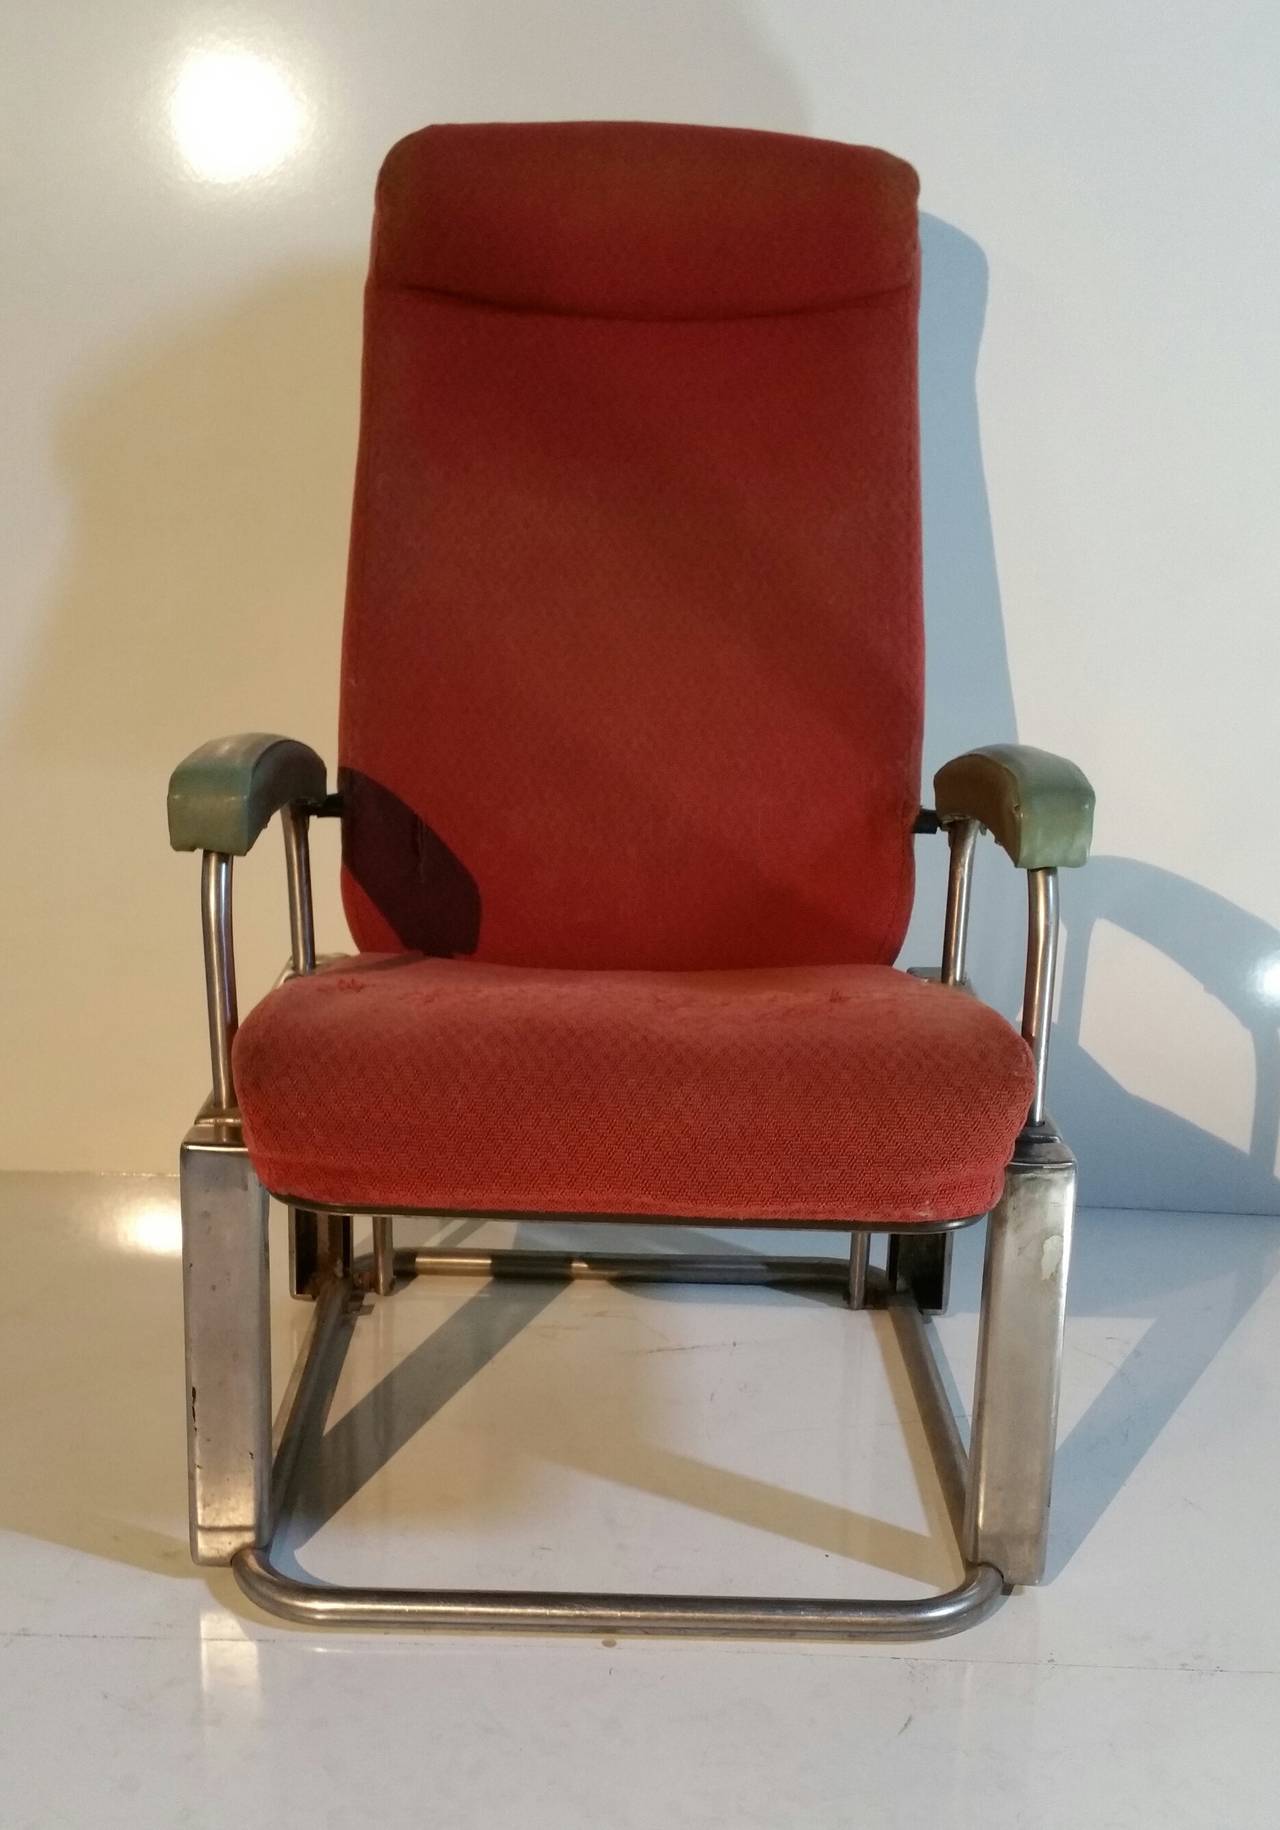 Mid-20th Century Henry Dreyfuss Industrial or Machine Age Lounge Chair for Pullman Train